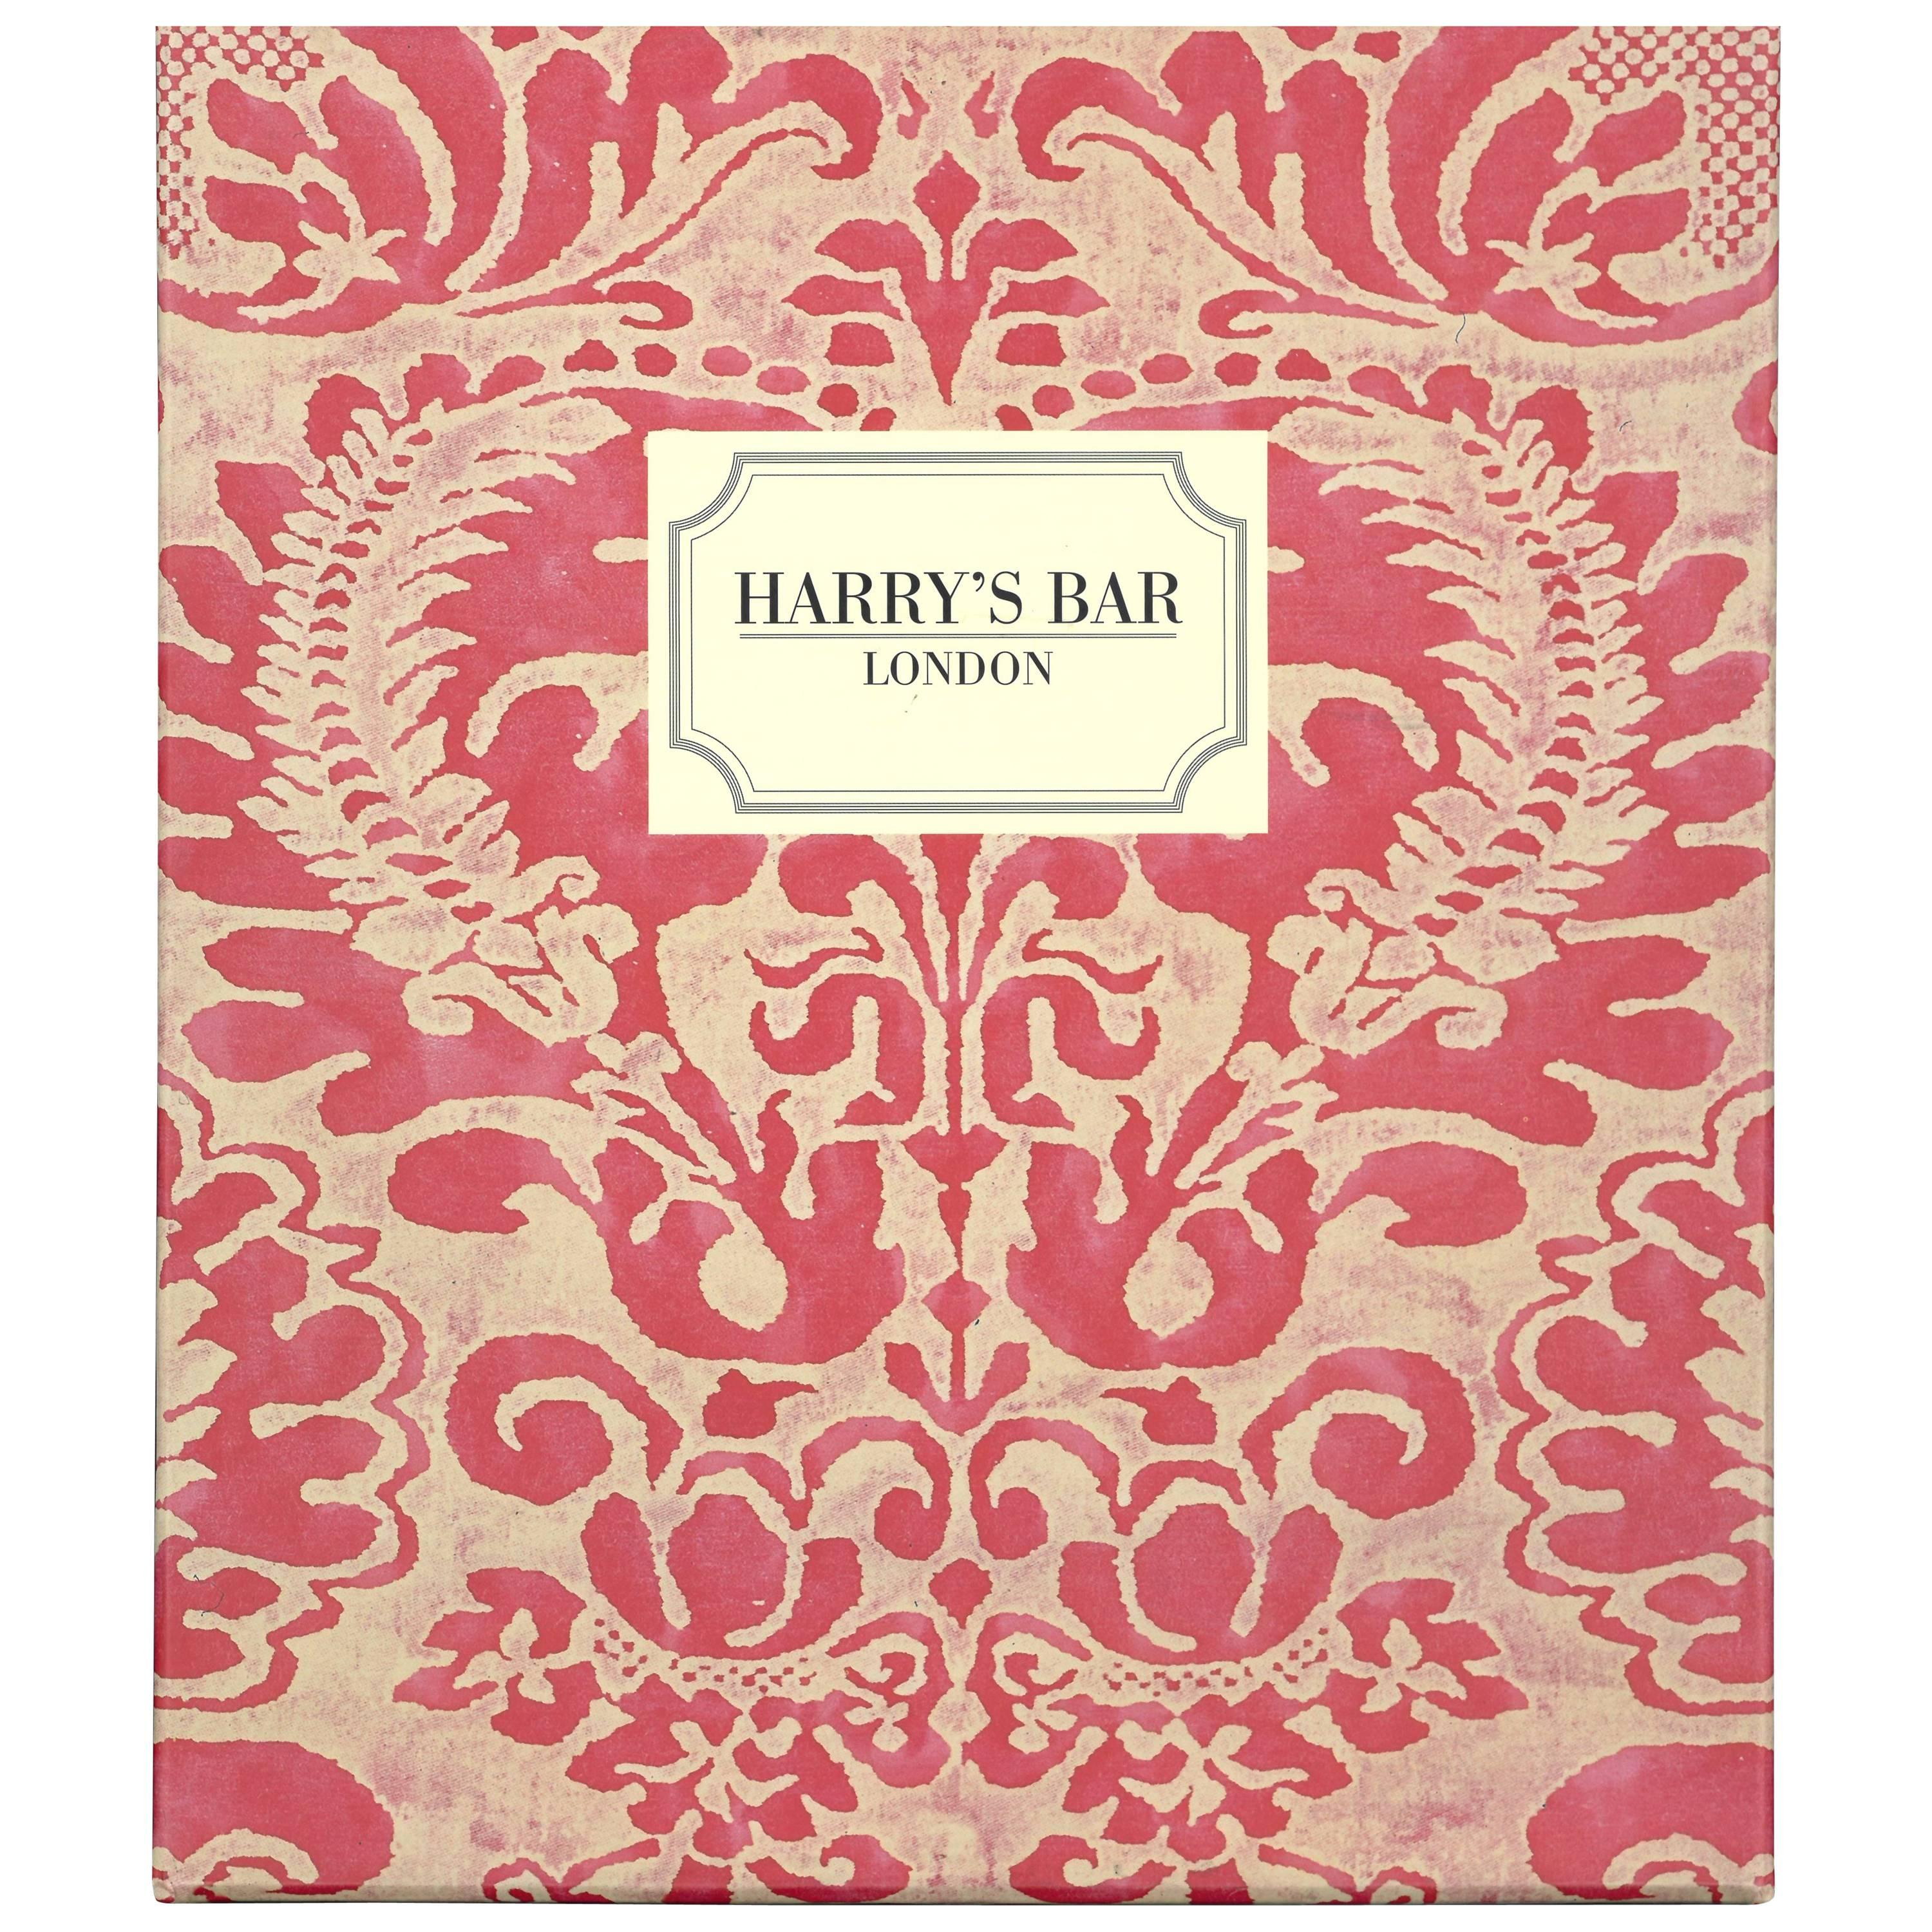 Harry's Bar London a Book about the Famous London Dining Club